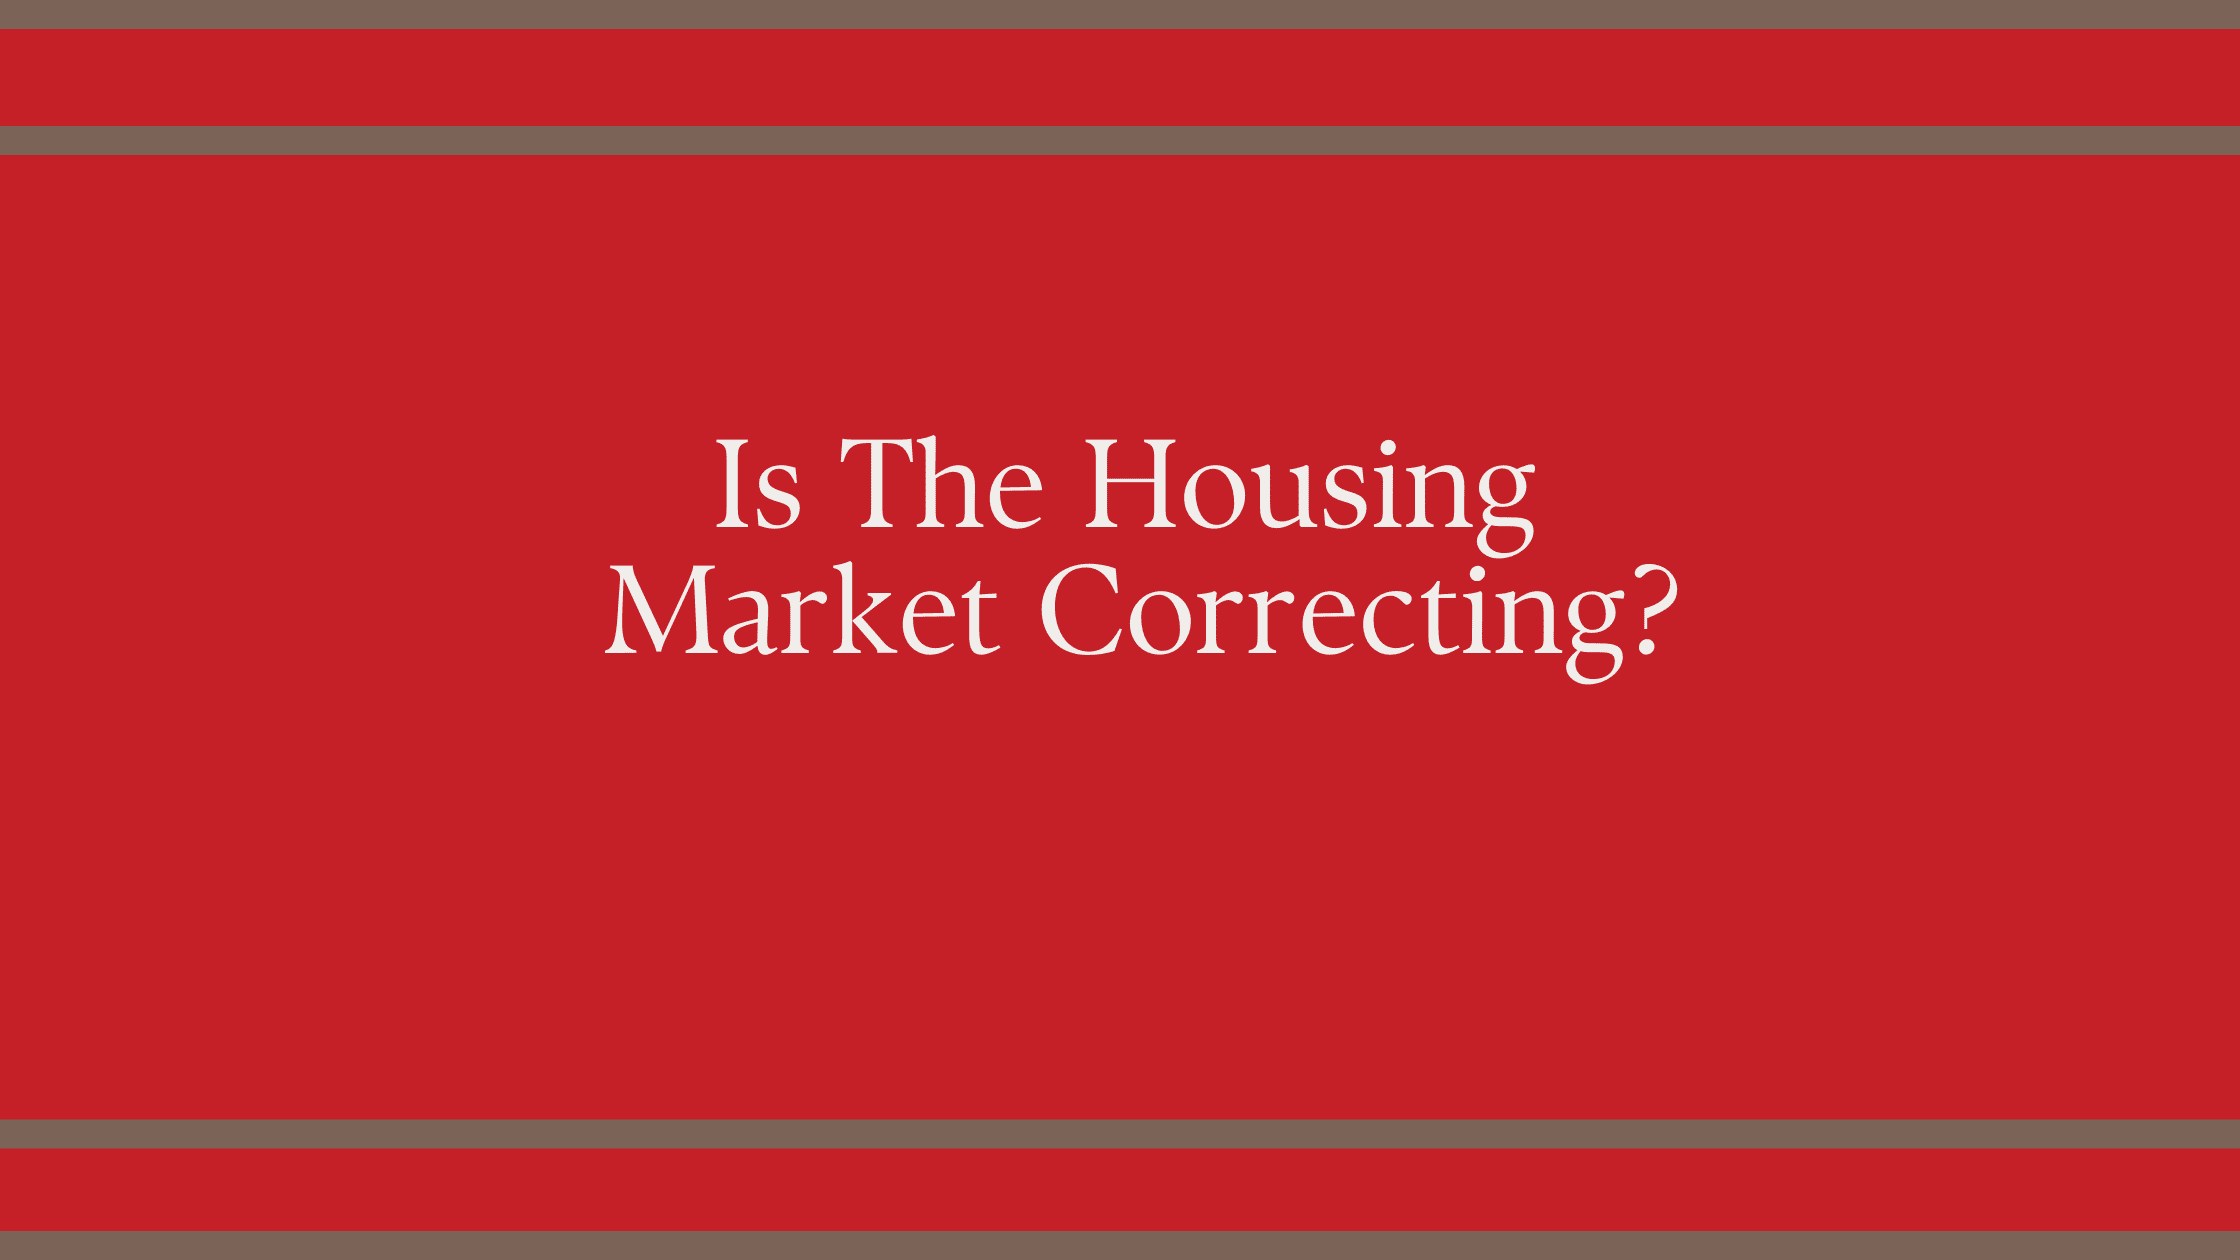 Is the housing market correcting